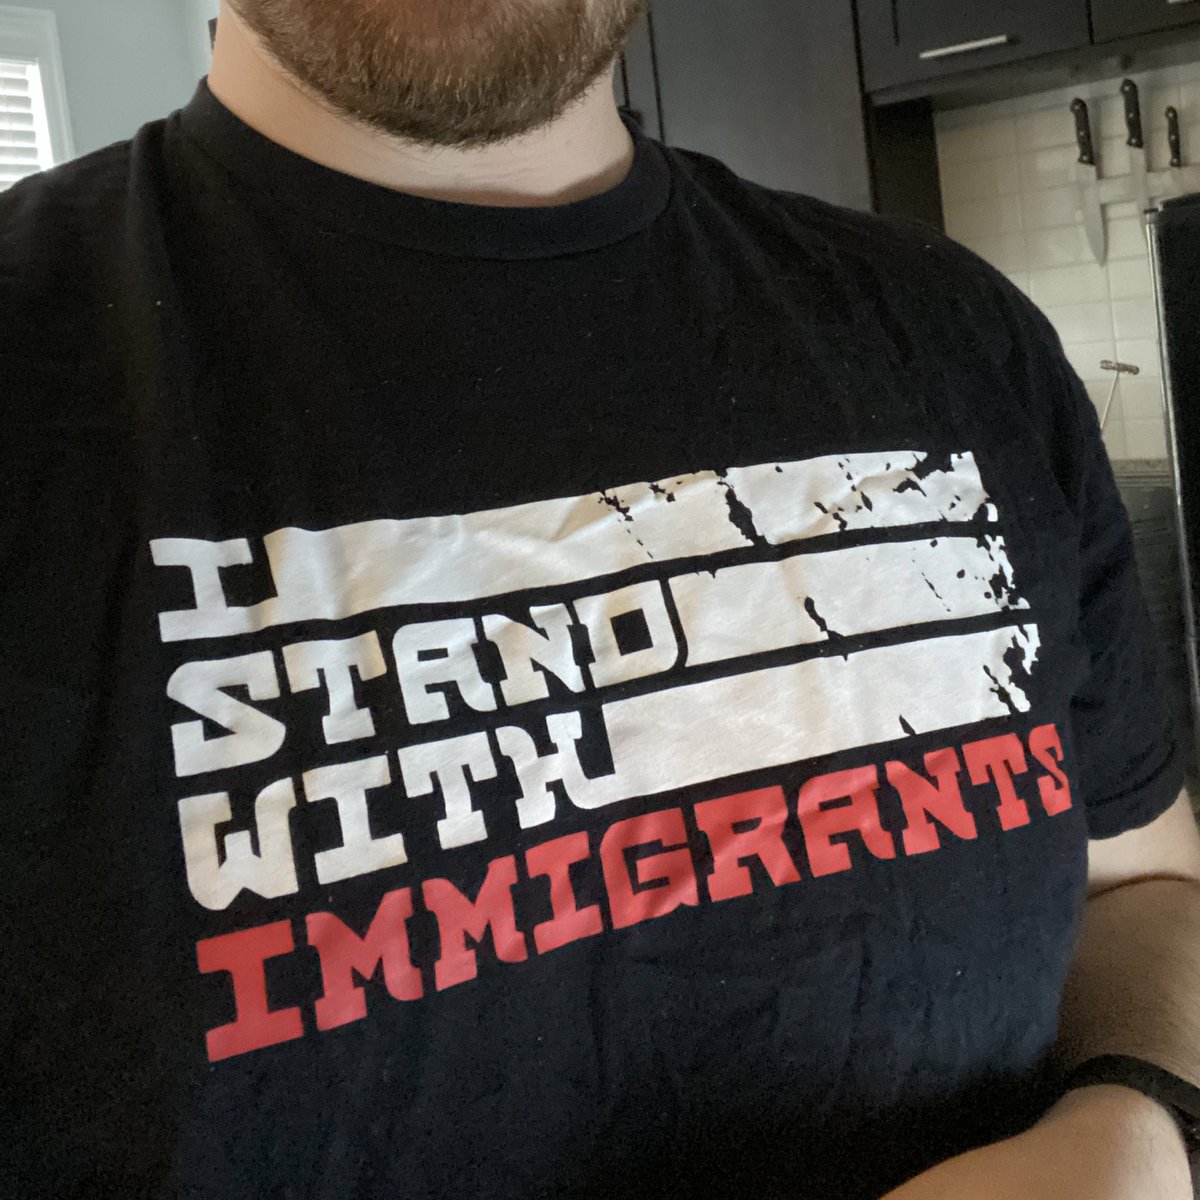 Day  — today (and everyday) we stand with immigrants. Even more important to vocalize support now as the White House continues to use racist and dangerous rhetoric about the Asian-American community when talking about the global pandemic impacting all of us.